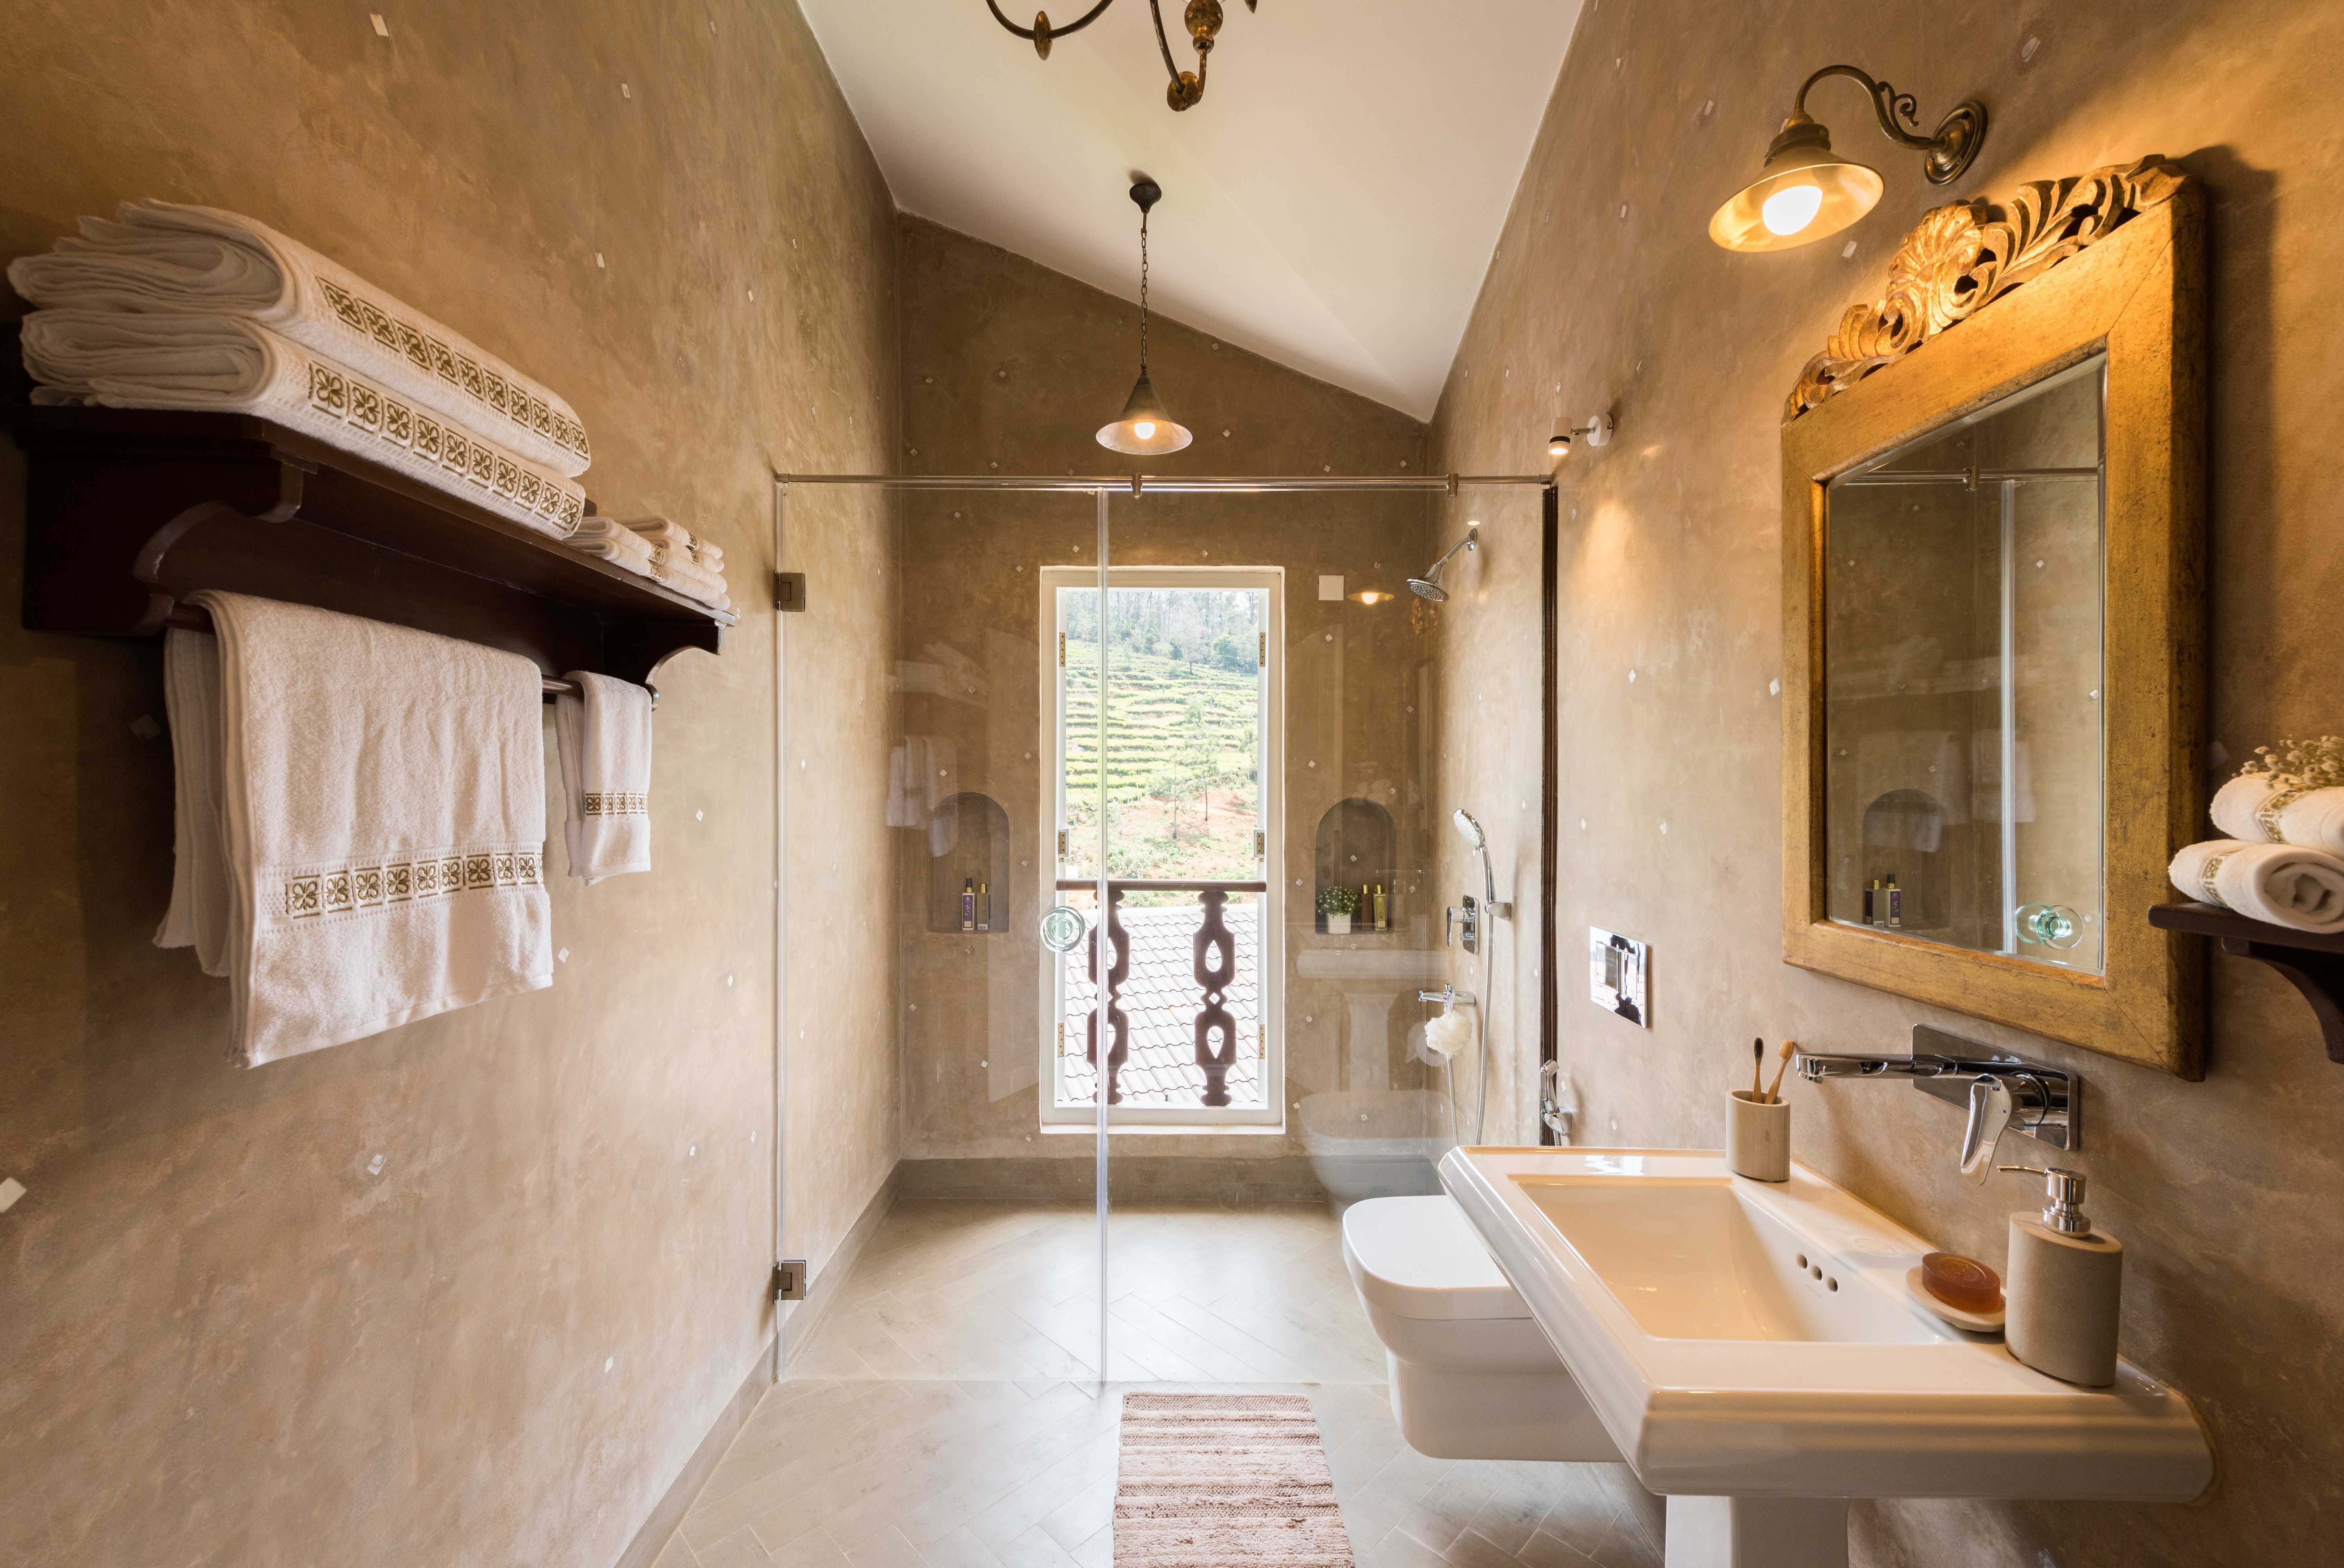 Main Bathroom Features for a Luxurious Space